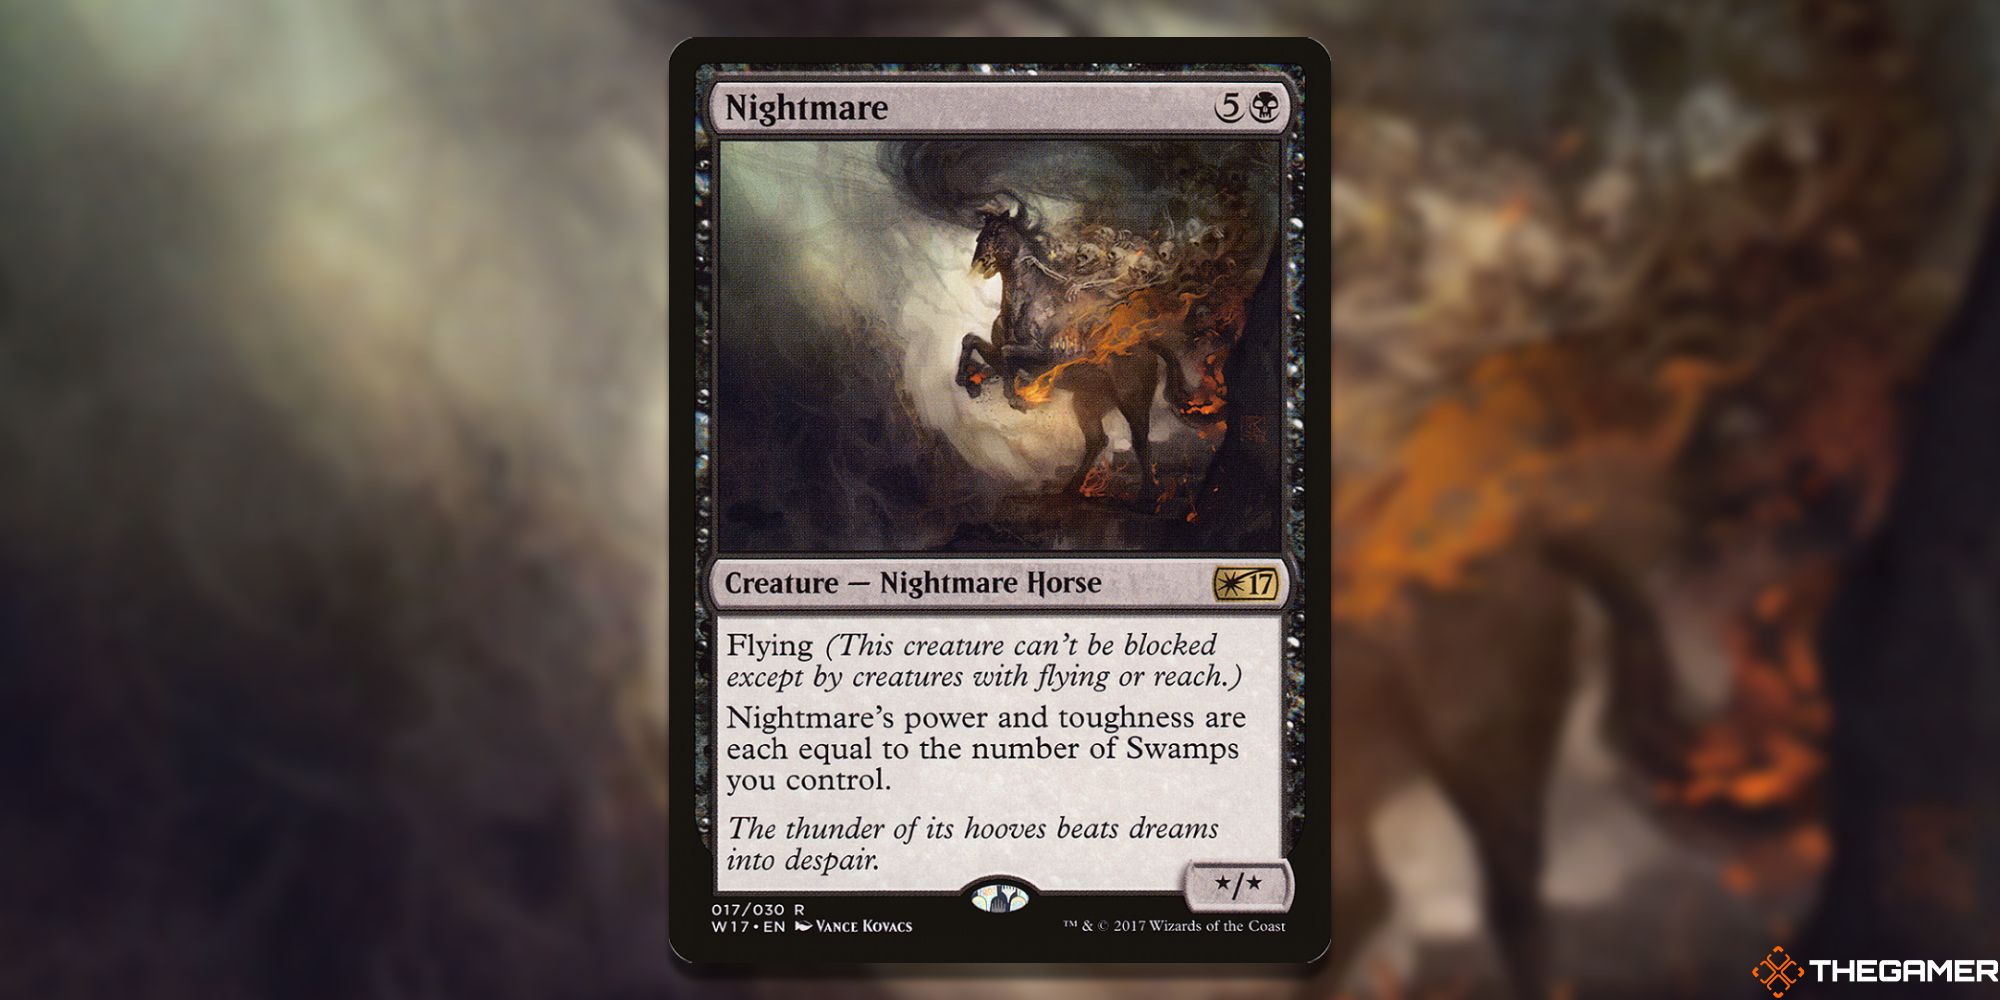 Image of the Nightmare card in Magic: The Gathering, with artwork by Vance Kovacs